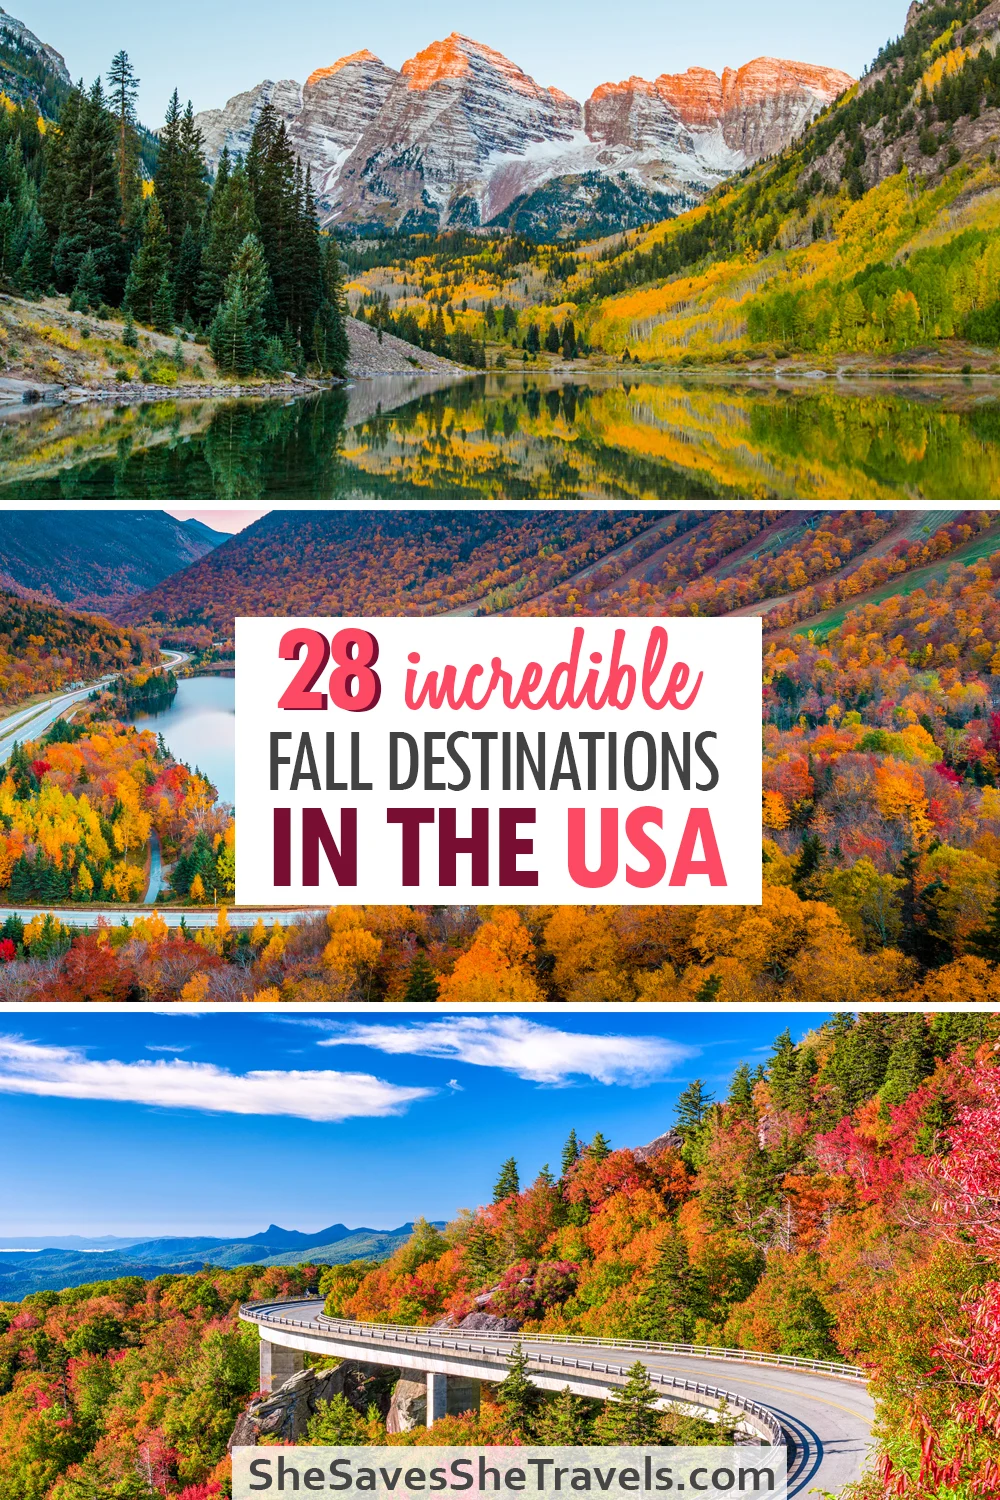 28 incredible fall destinations in the USA with three images of mountains and fall foliage